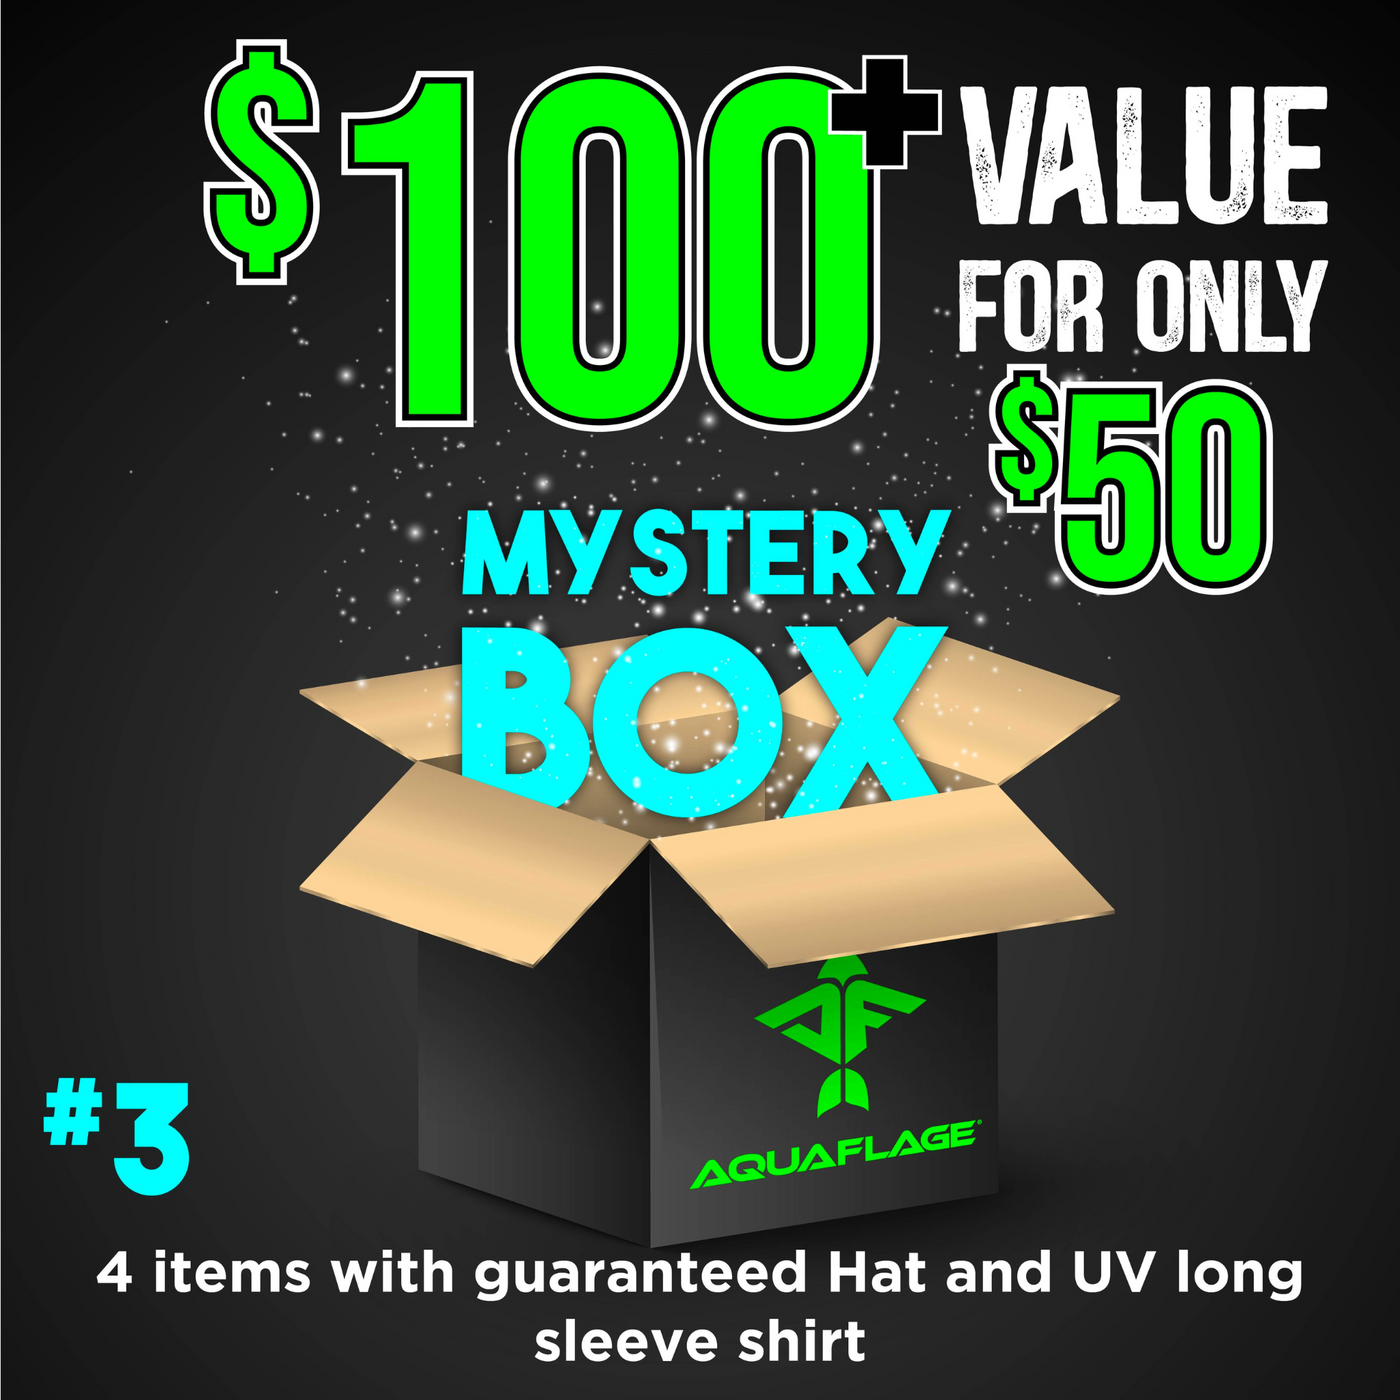 $100+ Value for $50 Mystery Box!